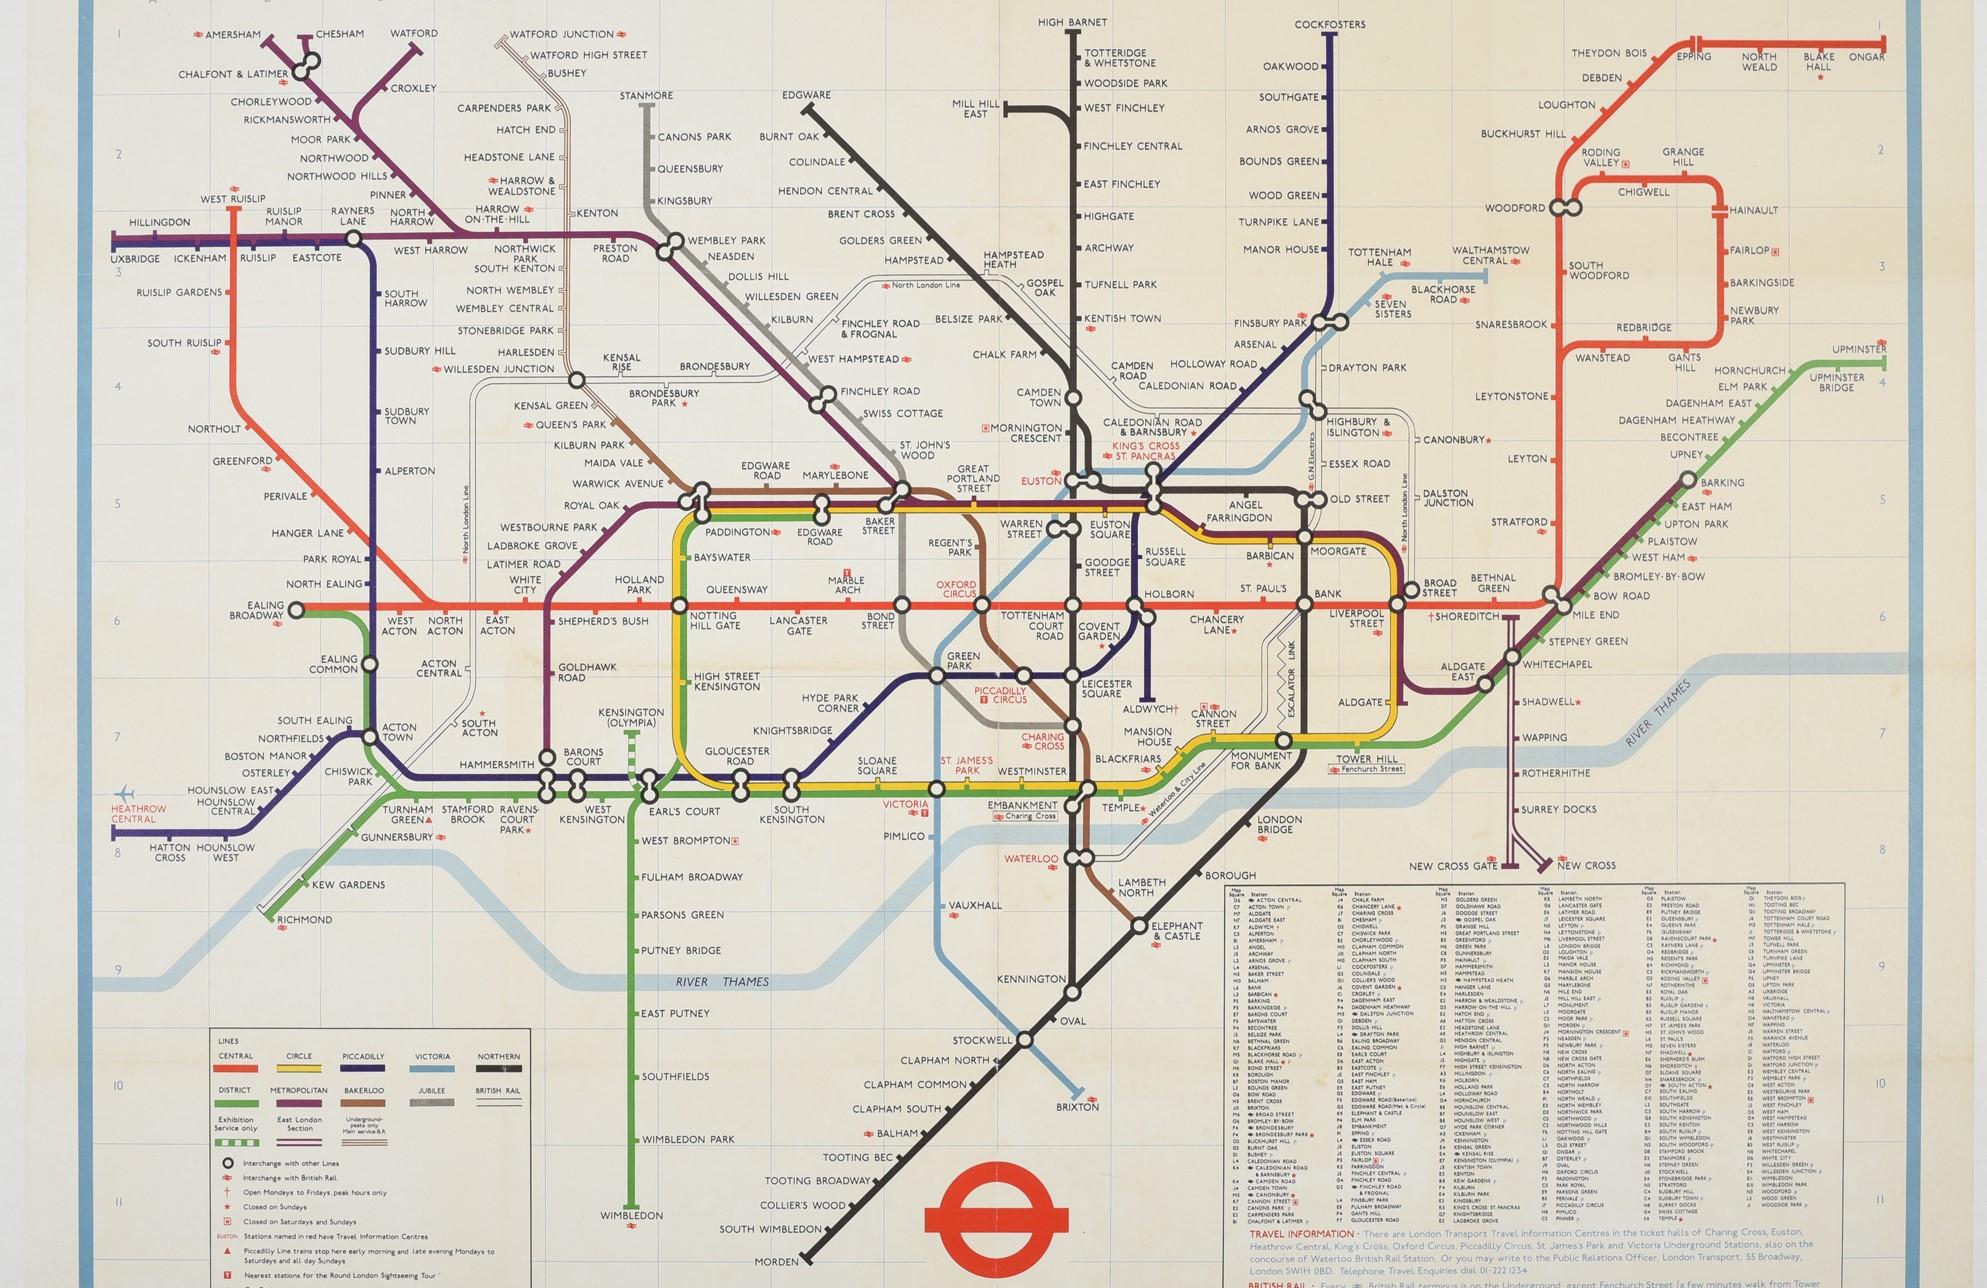 LONDON UNDERGROUND VINTAGE TUBE MAP CLASSIC  HUGE LARGE WALL ART POSTER PICTURE 